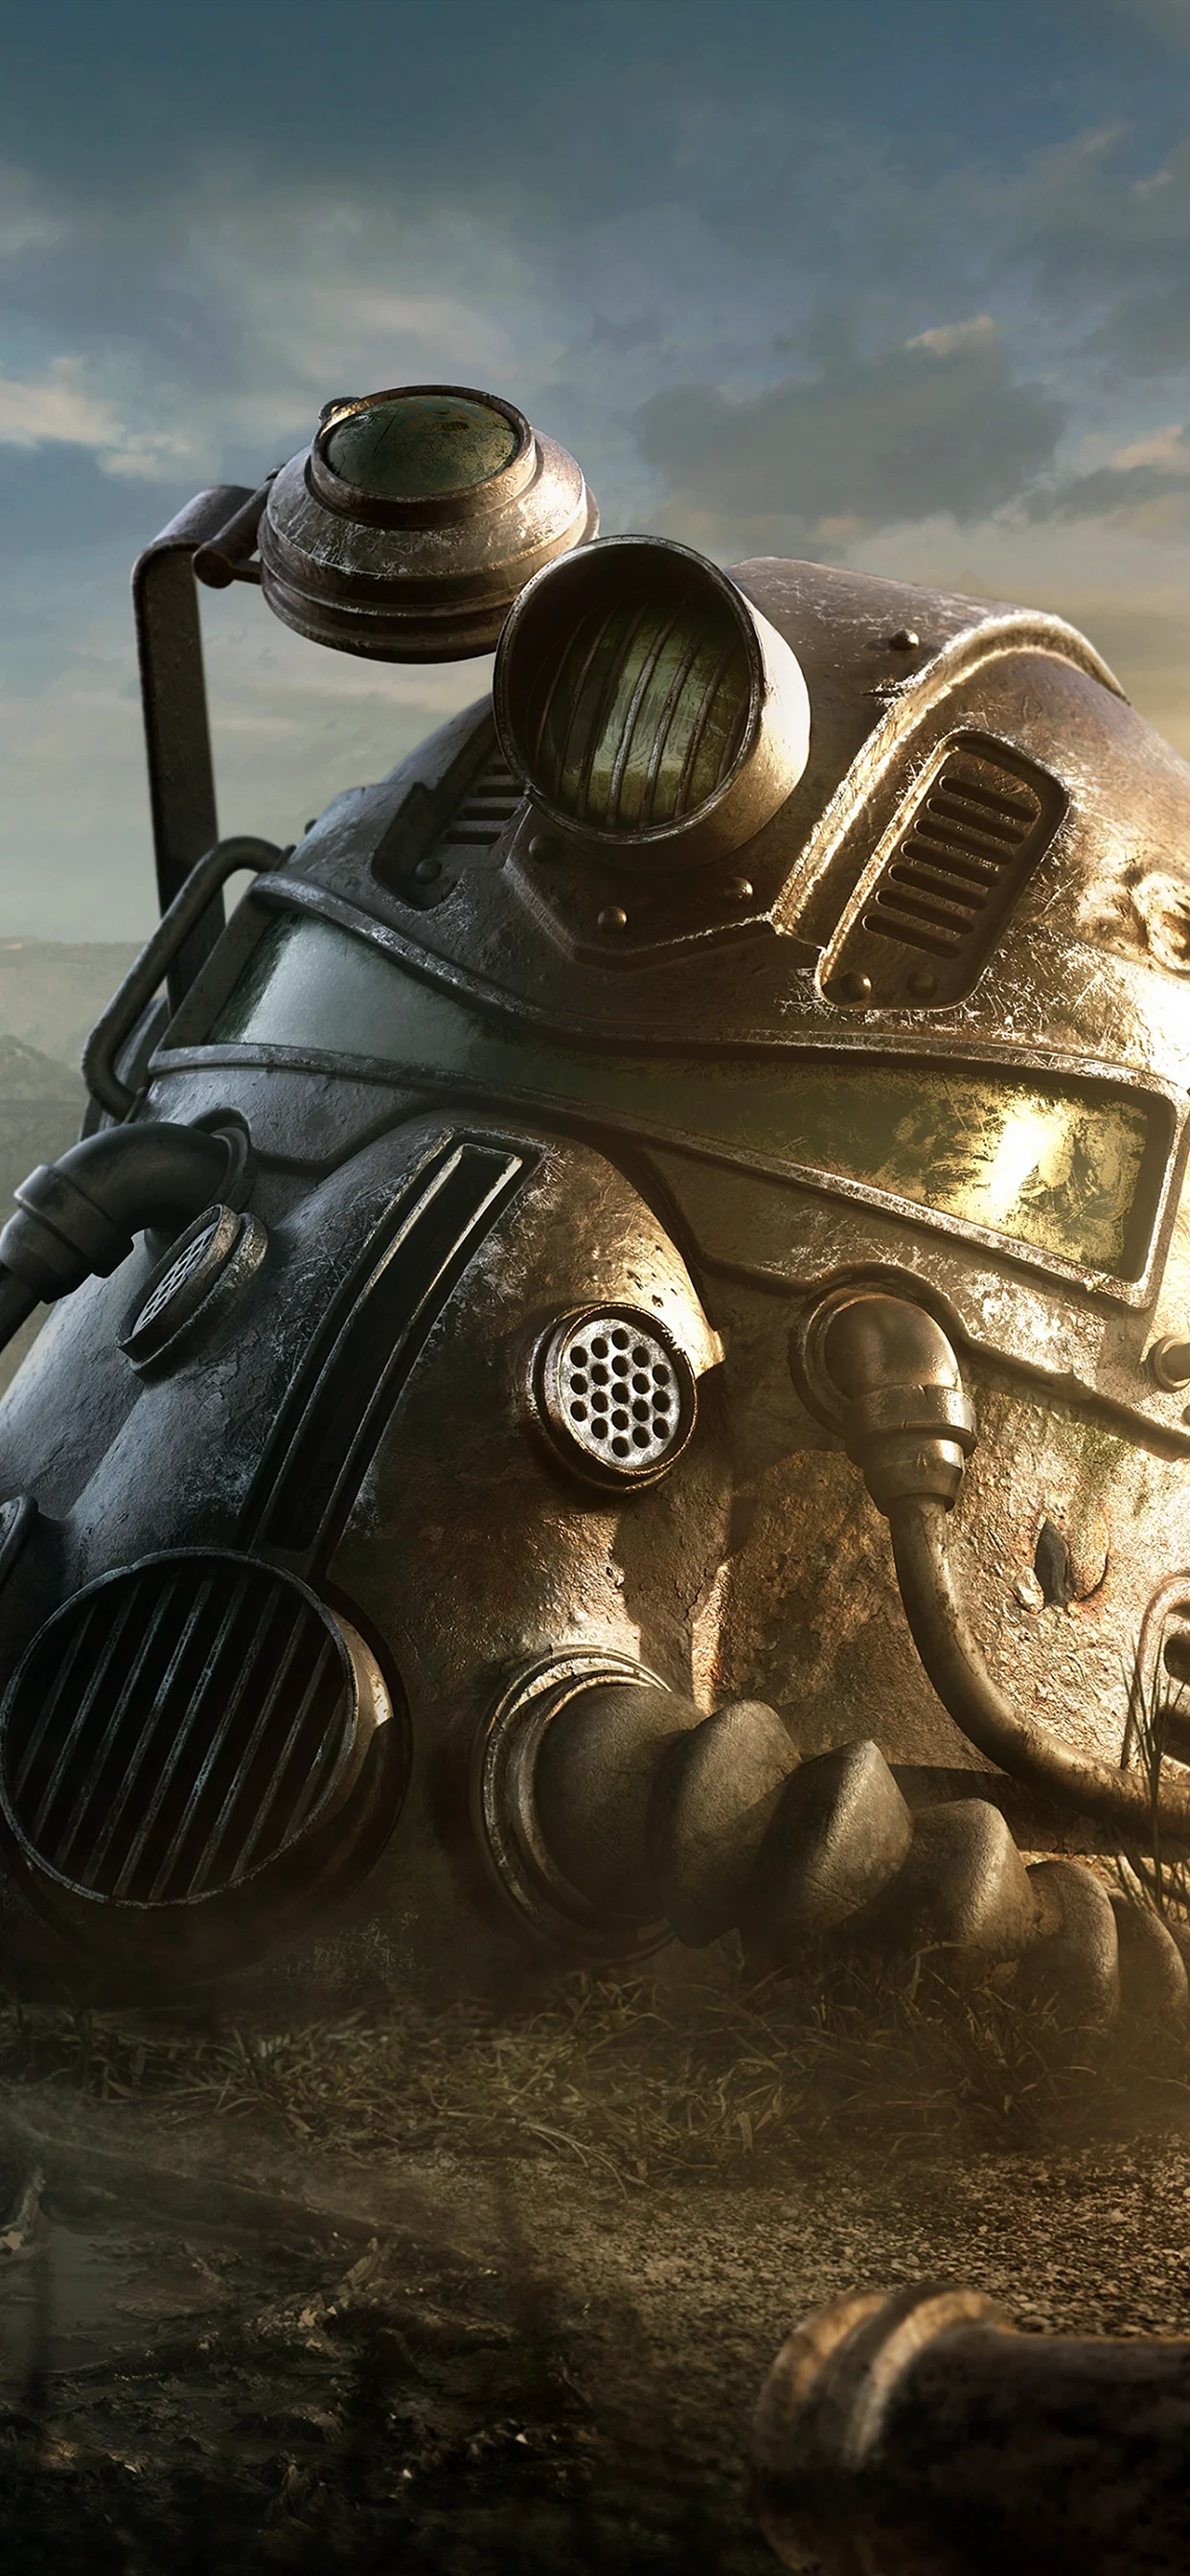 Fallout 76 Xbox One Wallpaper for iPhone 11 Pro Max